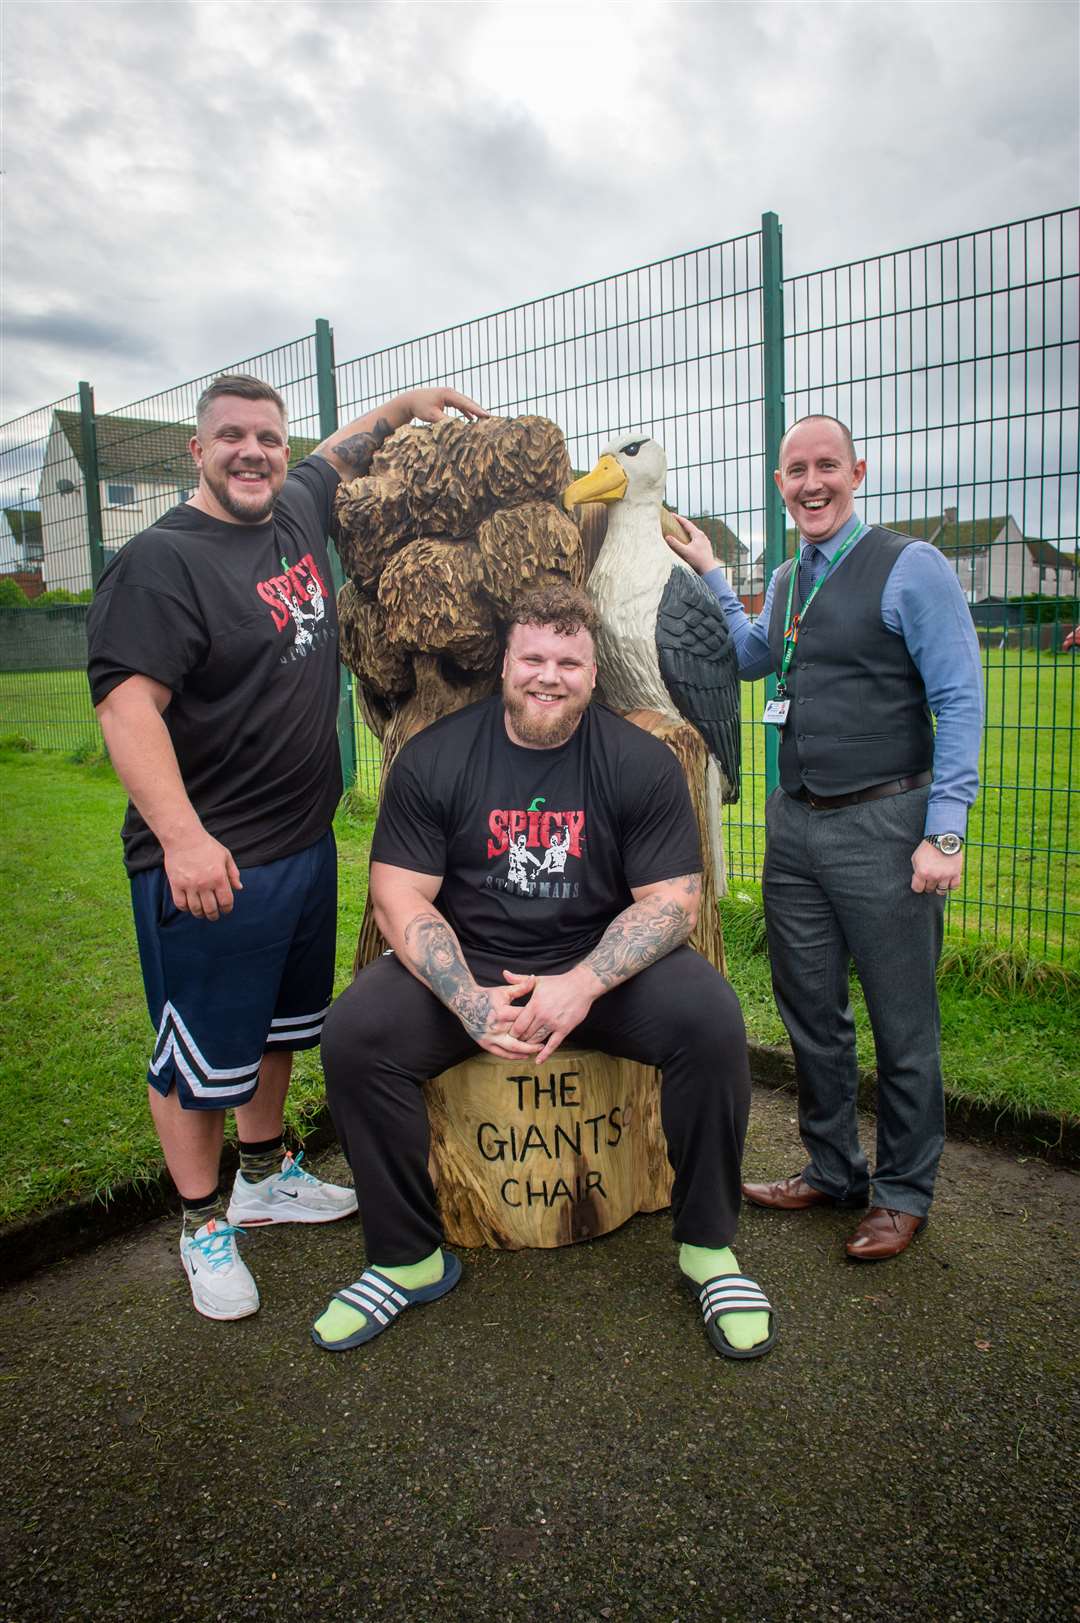 Tom and Luke Stoltman were surprised by schoolchildren at South Lodge with a specially made Giants Chair Bench thanks to a donation they made to the school.  They are pictured with director David Hayes-MacLeod.  Photo: Callum Mackay